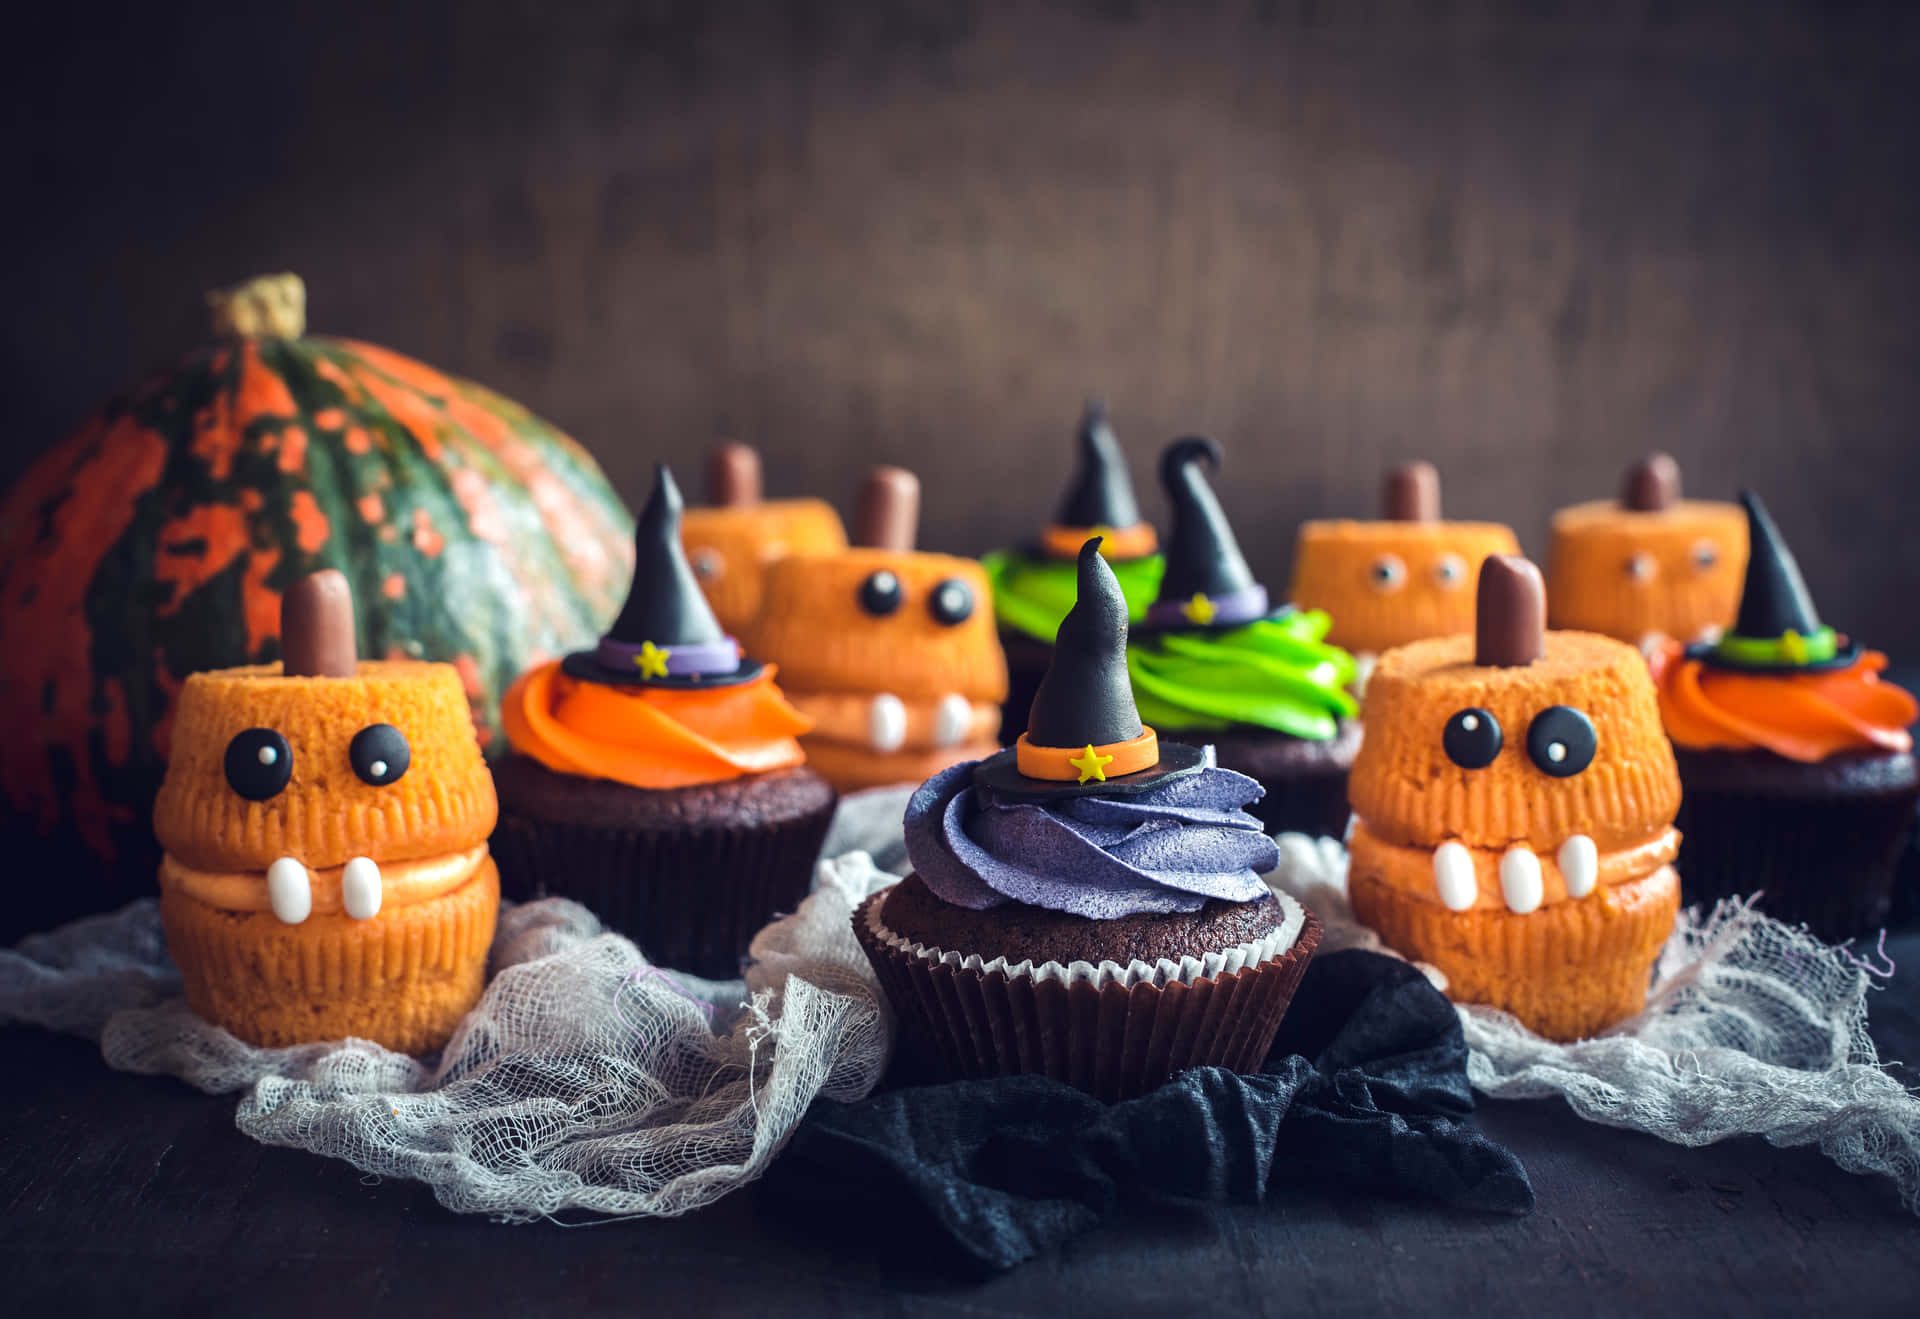 Celebrate this spooky season with these delicious Halloween Cupcakes Wallpaper